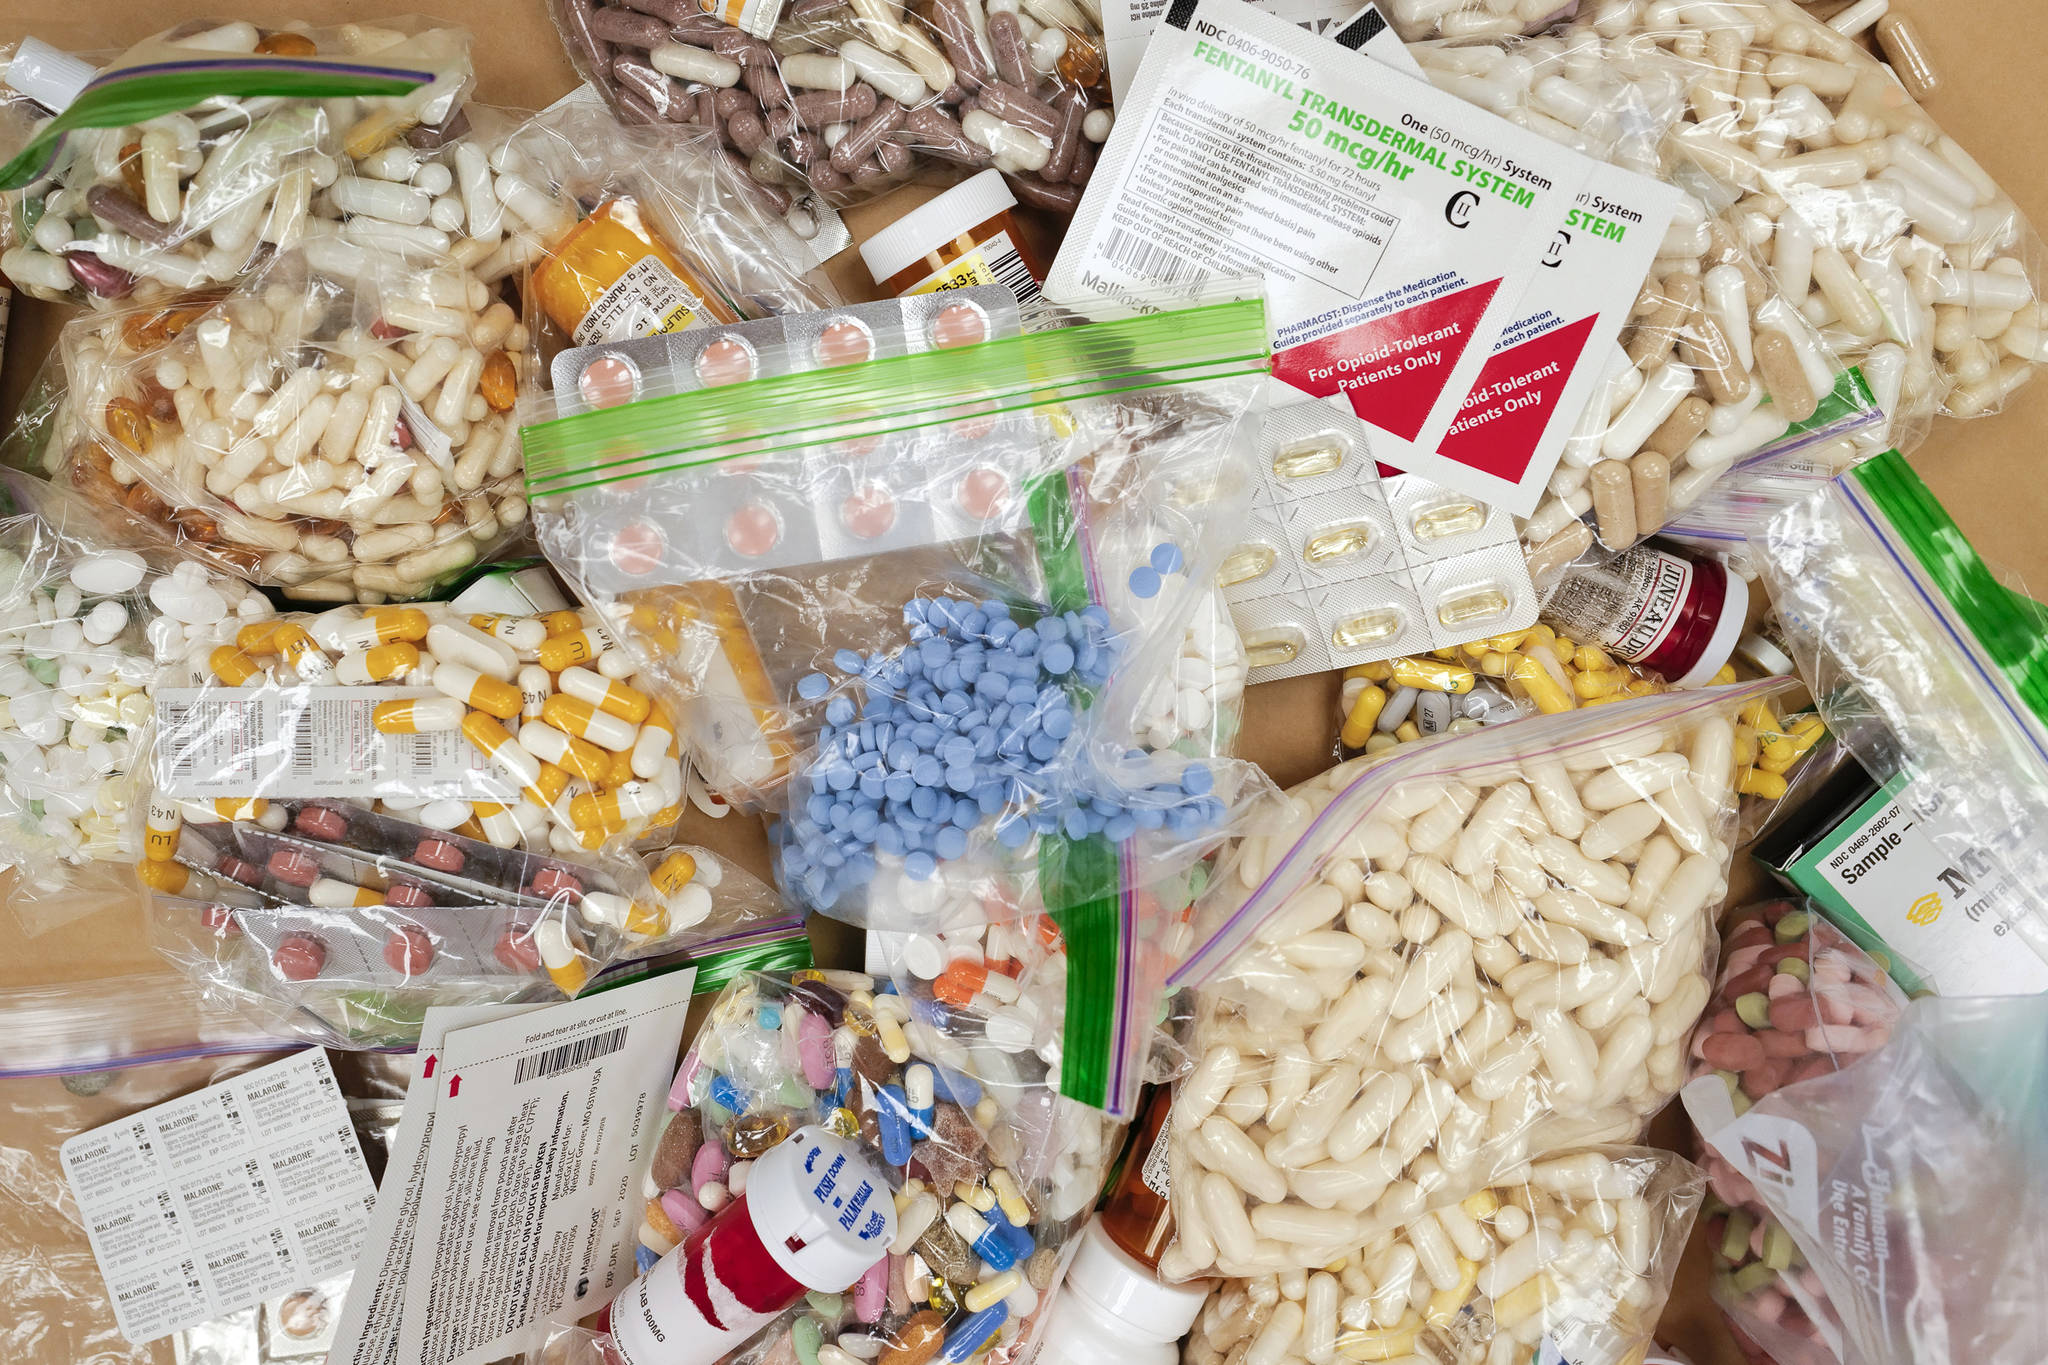 Prescriptions drugs, vitamins, hormones, and other drugs left in the drug drop box in the lobby of the Juneau Police Department in September 2019. (Michael Penn / Juneau Empire File)